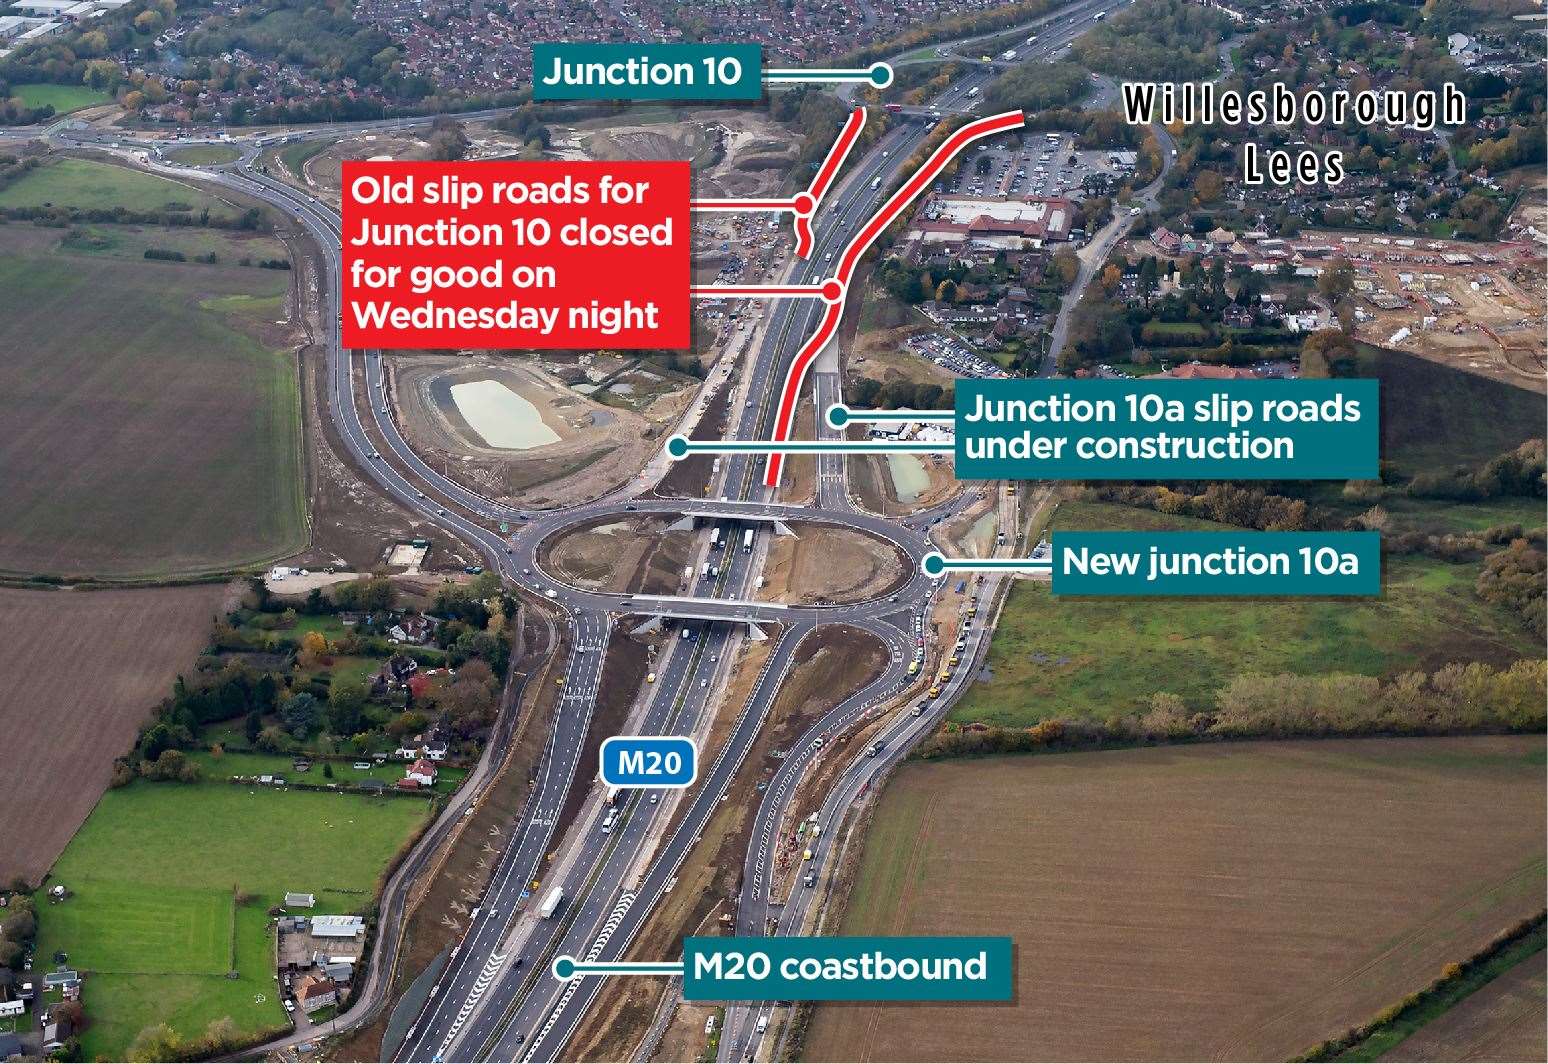 The coastbound on-slip and London-bound off-slip at Junction 10 closed earlier this year